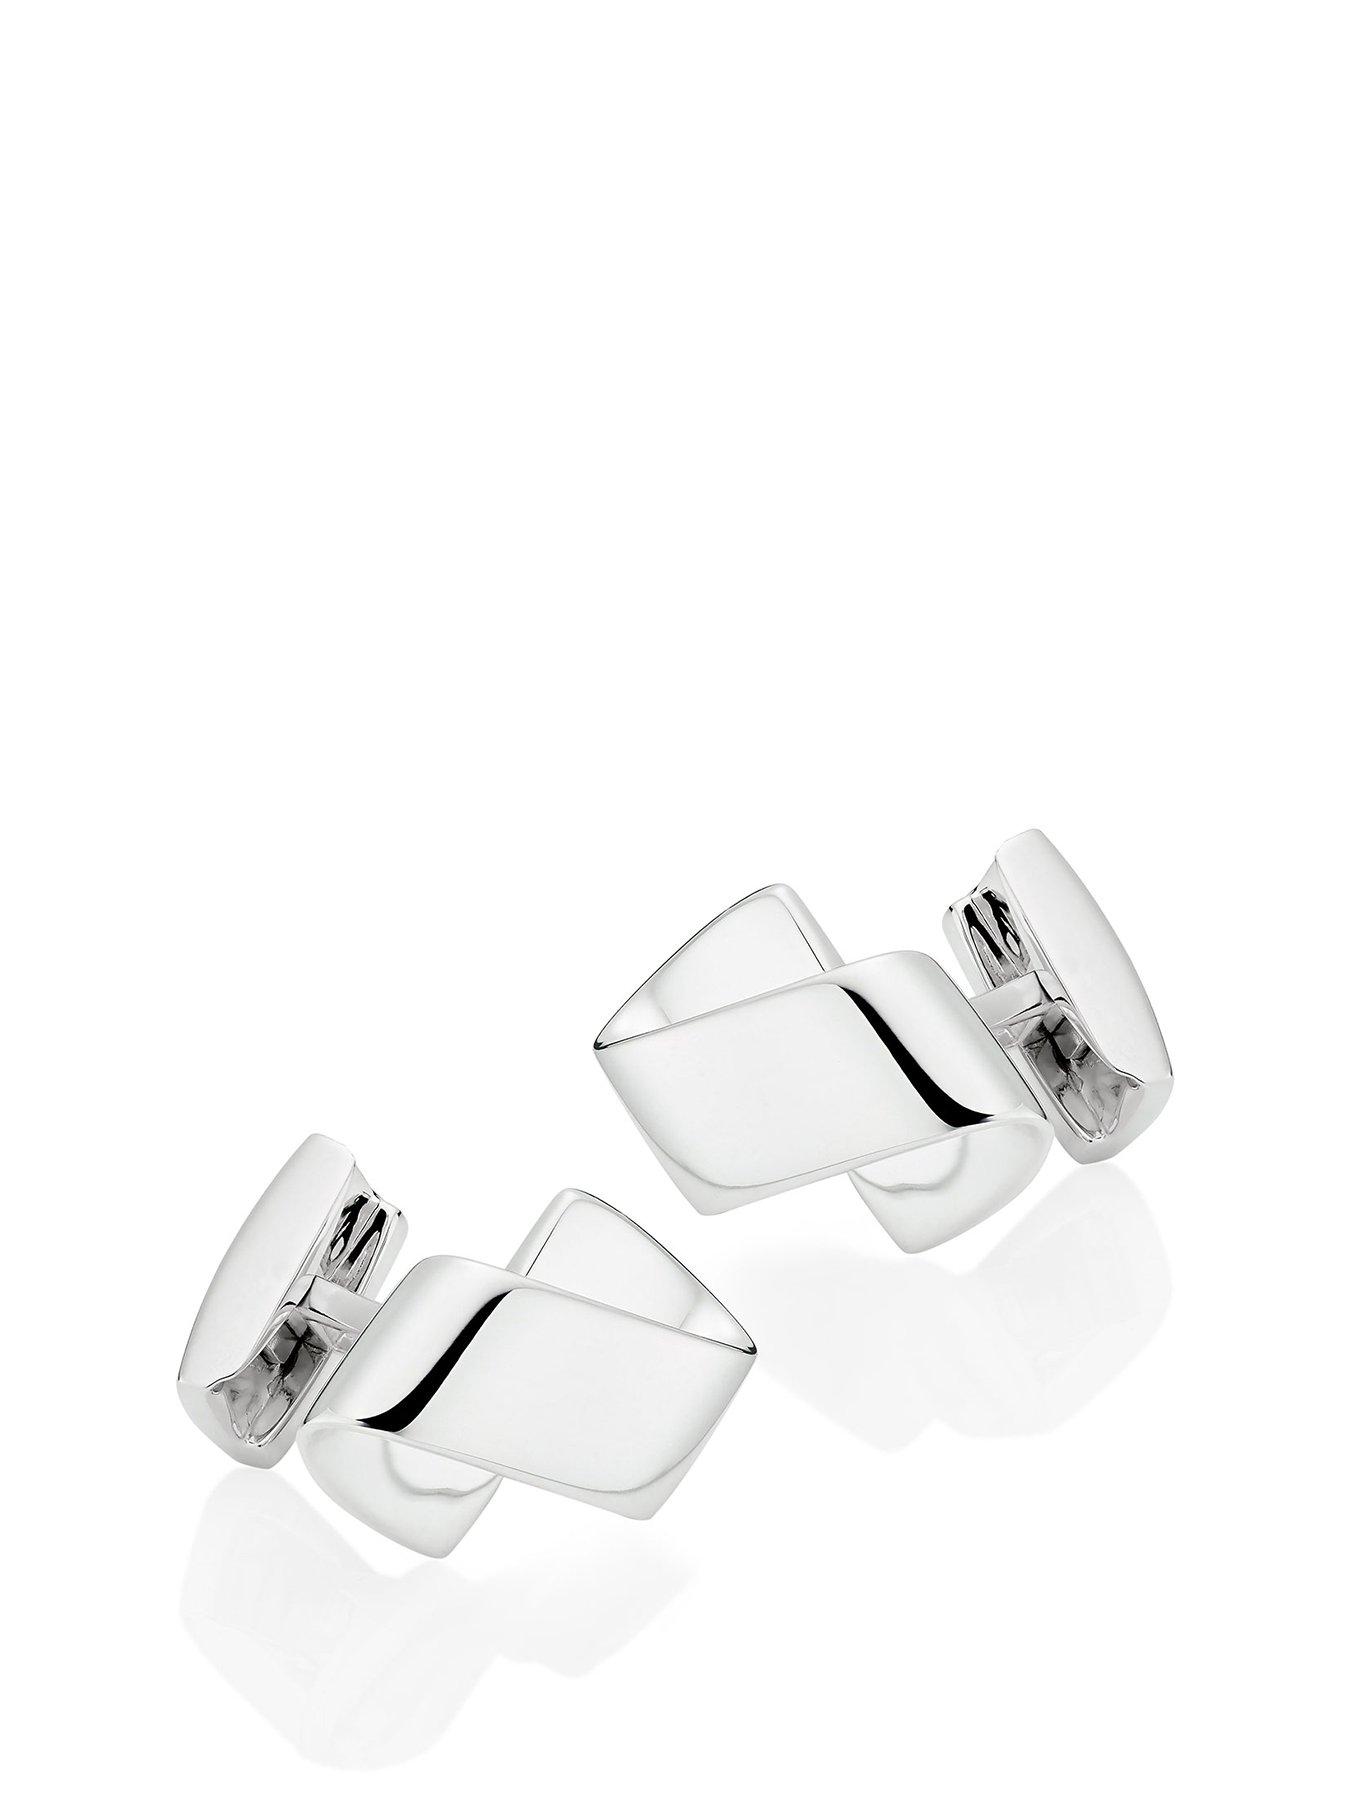 Jewellery & watches Men's Sterling Silver Stylish Elegant Pair of Cufflinks in Polished Finish